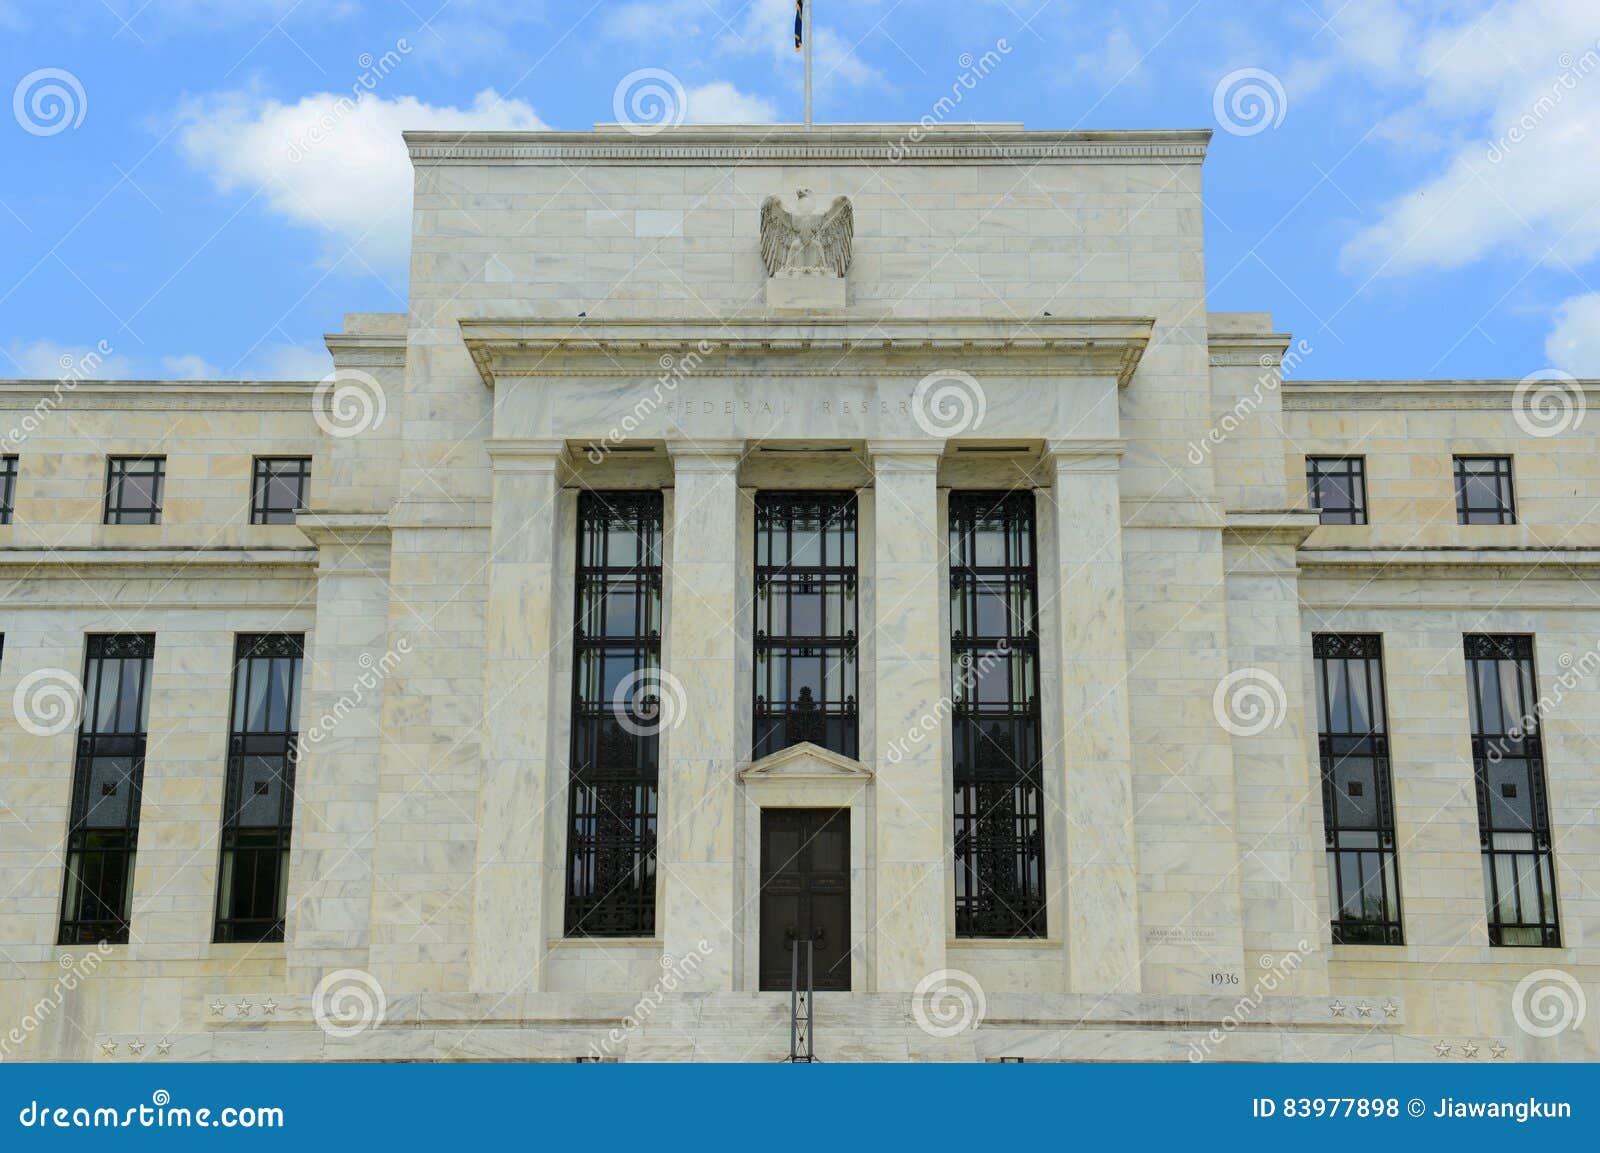 federal reserve building in washington dc, usa